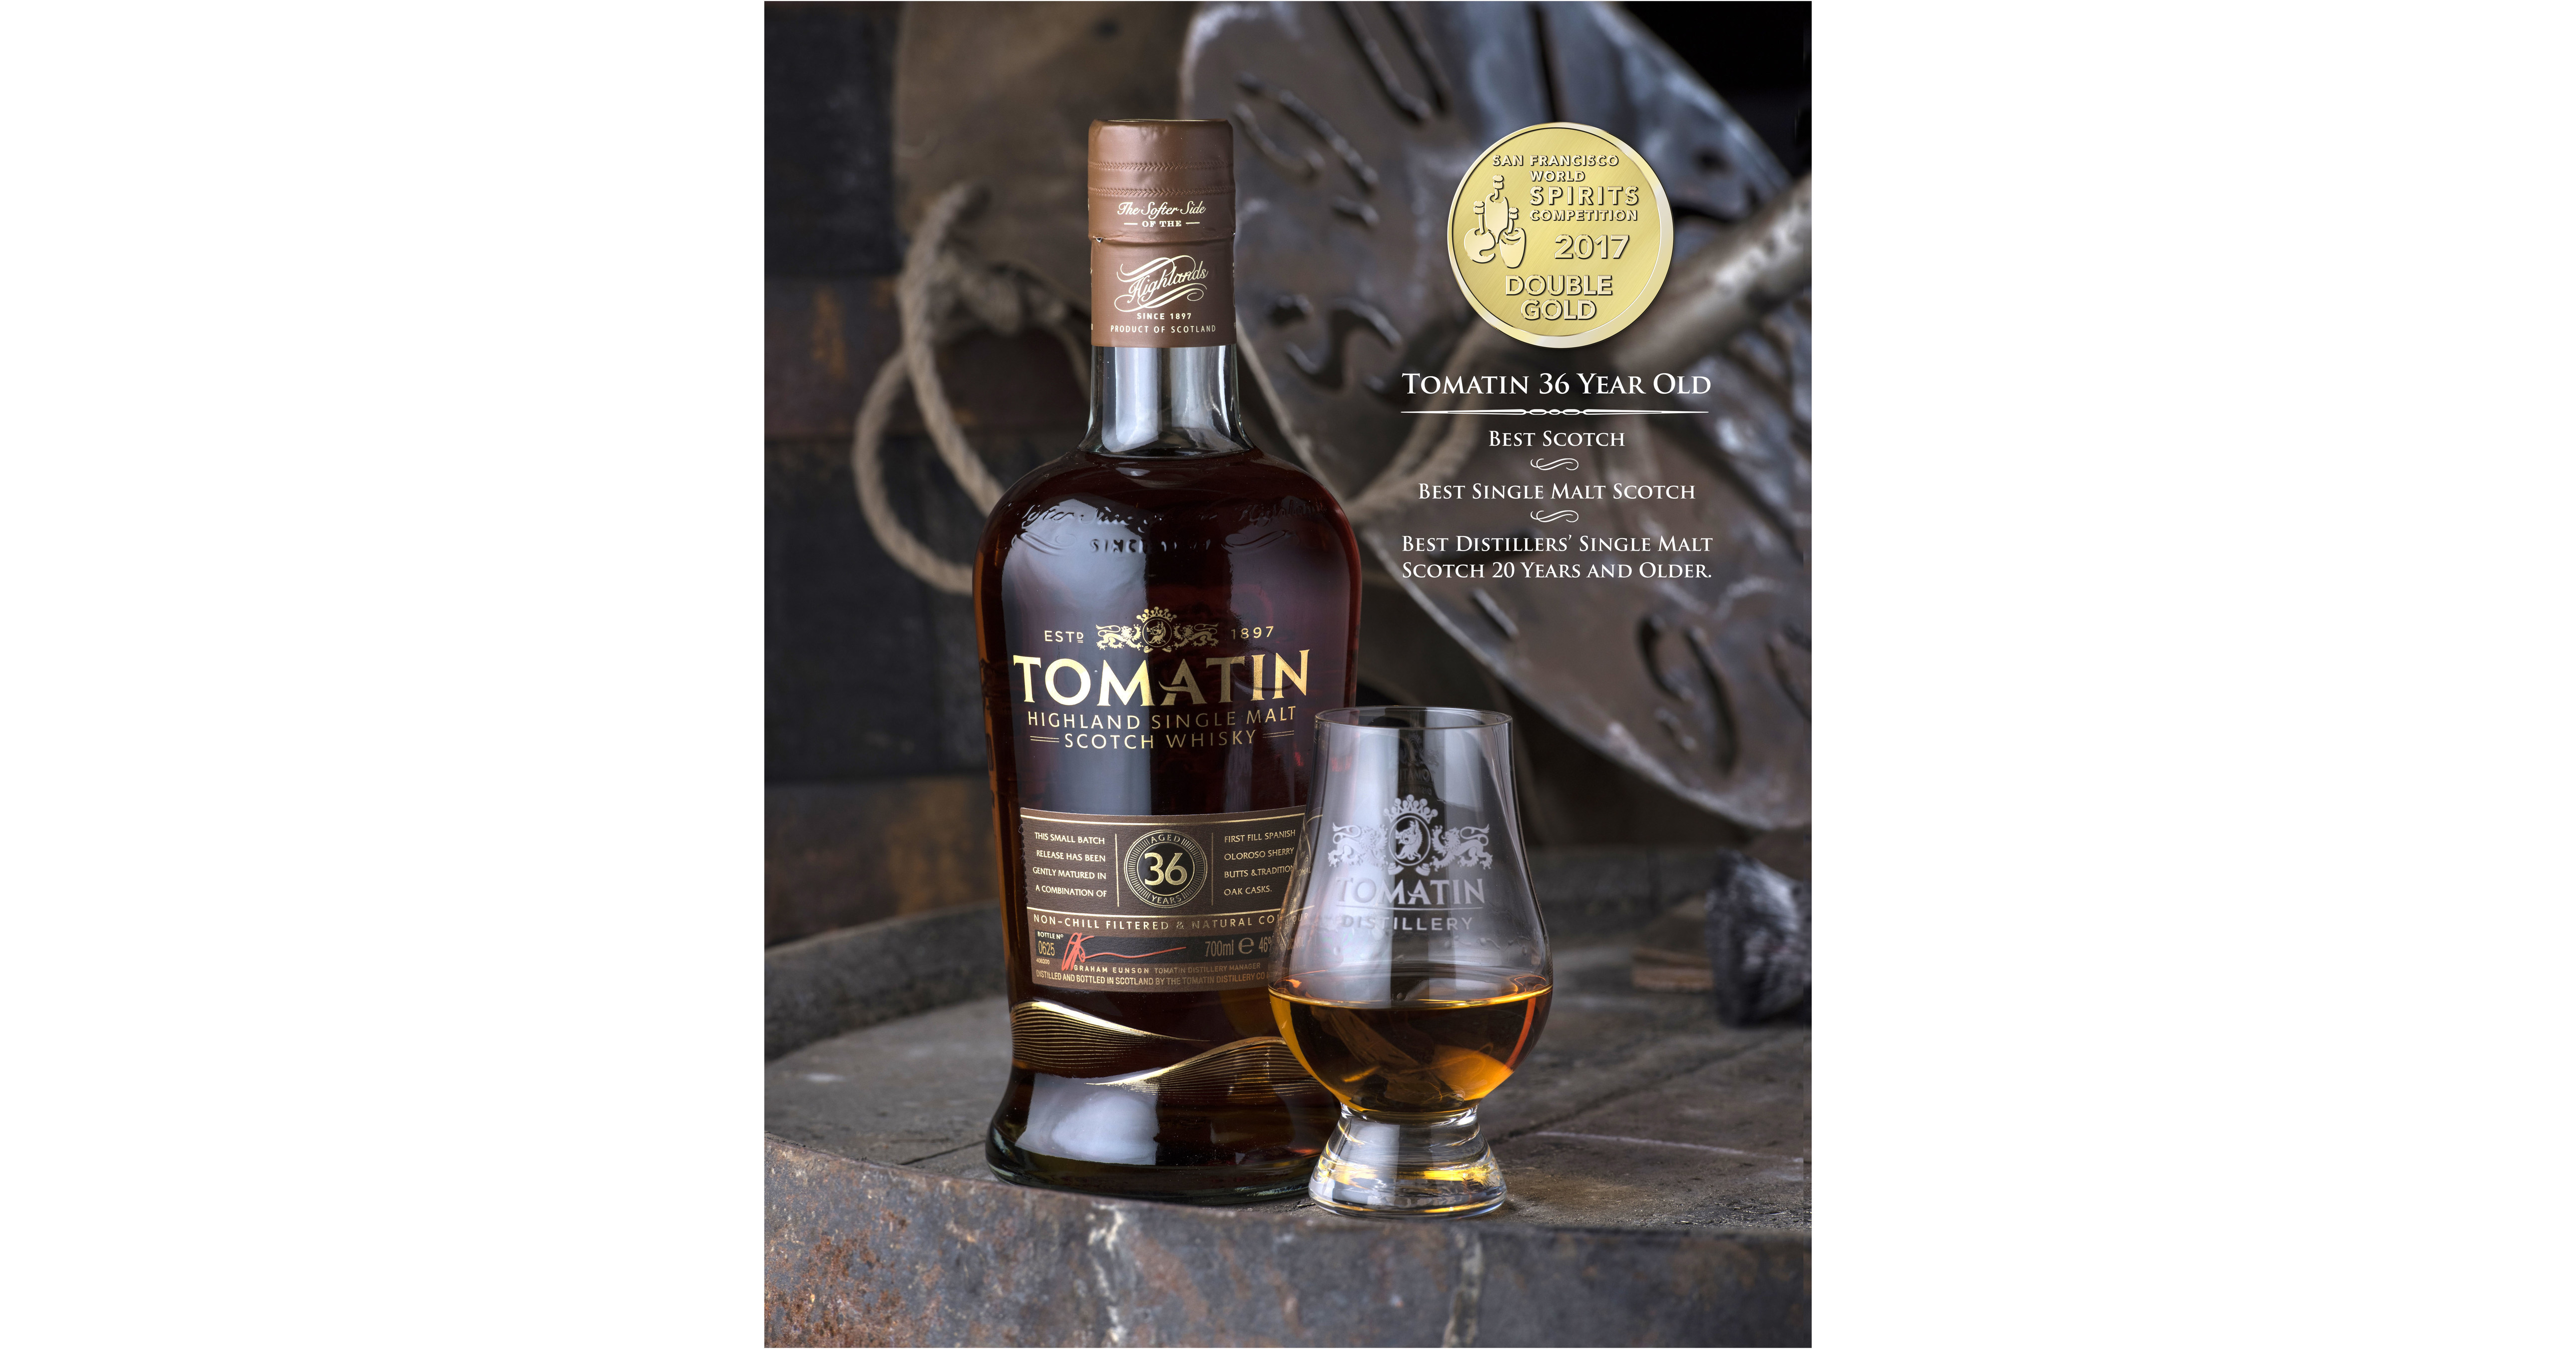 Phillips Distilling Co.’s Tomatin Named Best Scotch photo